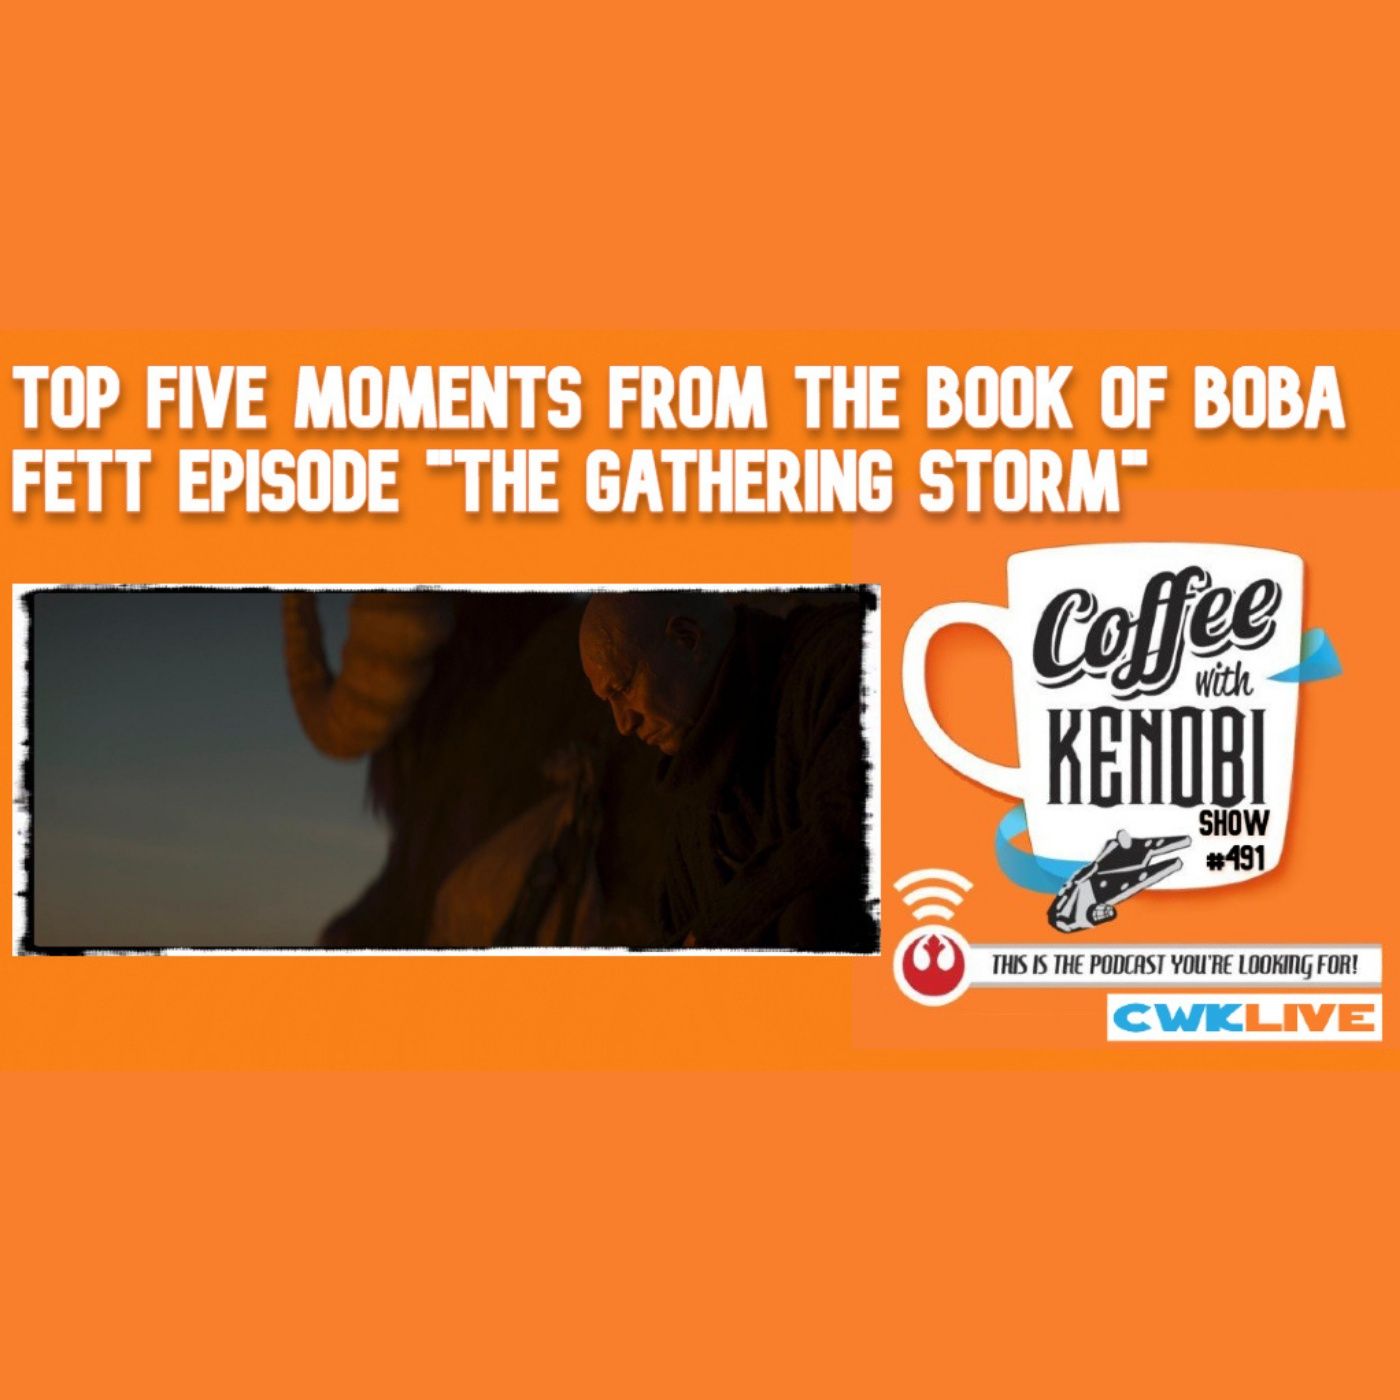 CWK Show #491 LIVE: Top Five Moments From The Book of Boba Fett 